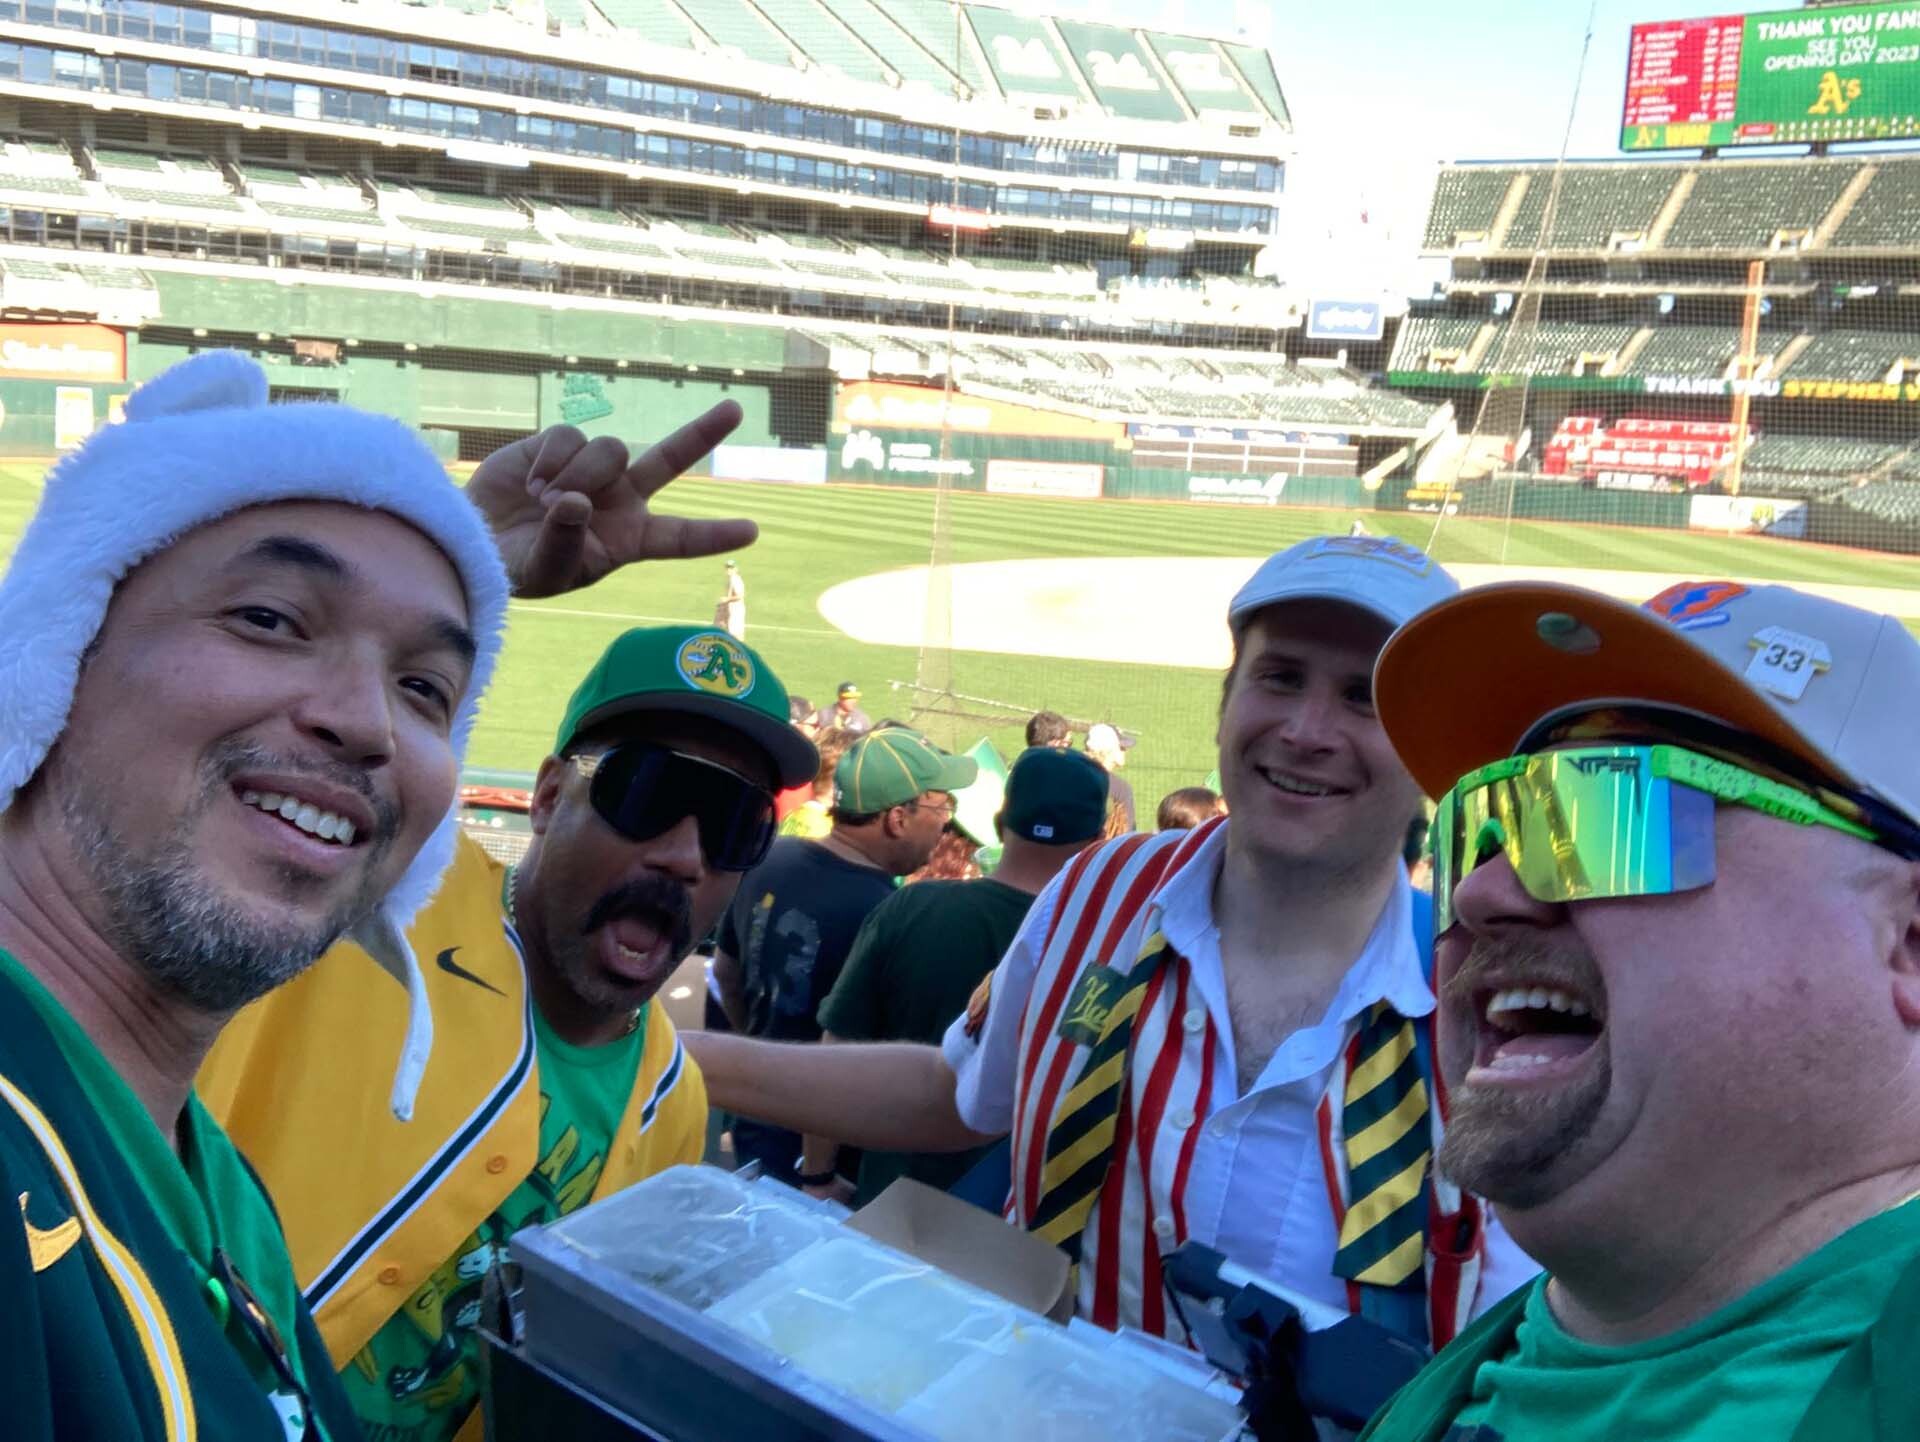 Hot dog vendor holds a tray of condiments surrounded by smiling A's fans.